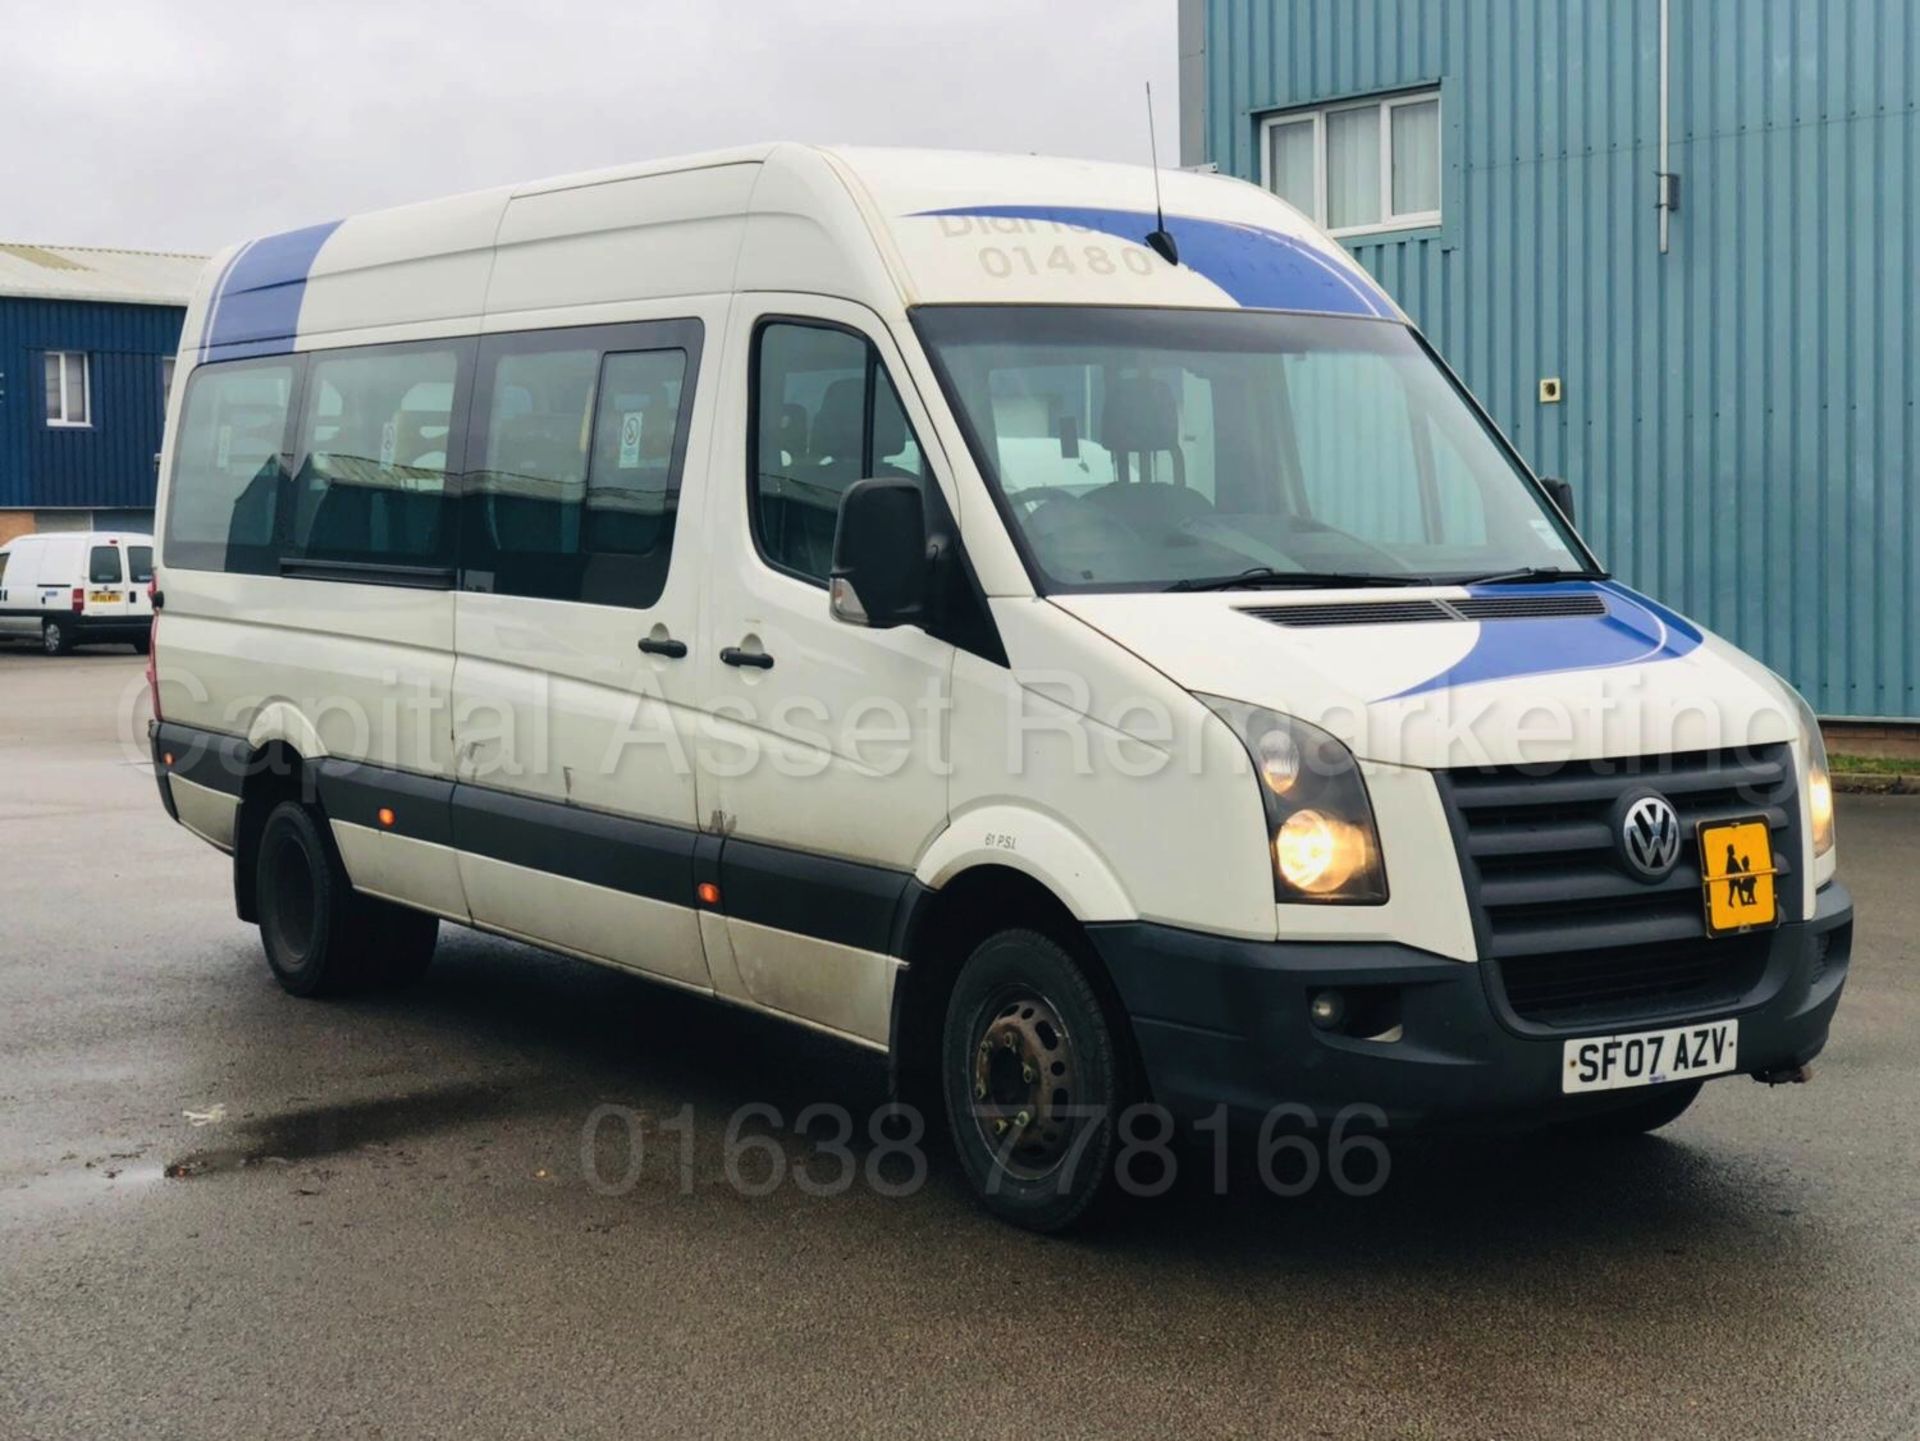 VOLKSWAGEN CRAFTER 2.5 TDI *LWB - 16 SEATER MINI-BUS / COACH* (2007) *ELECTRIC WHEEL CHAIR LIFT* - Image 10 of 30